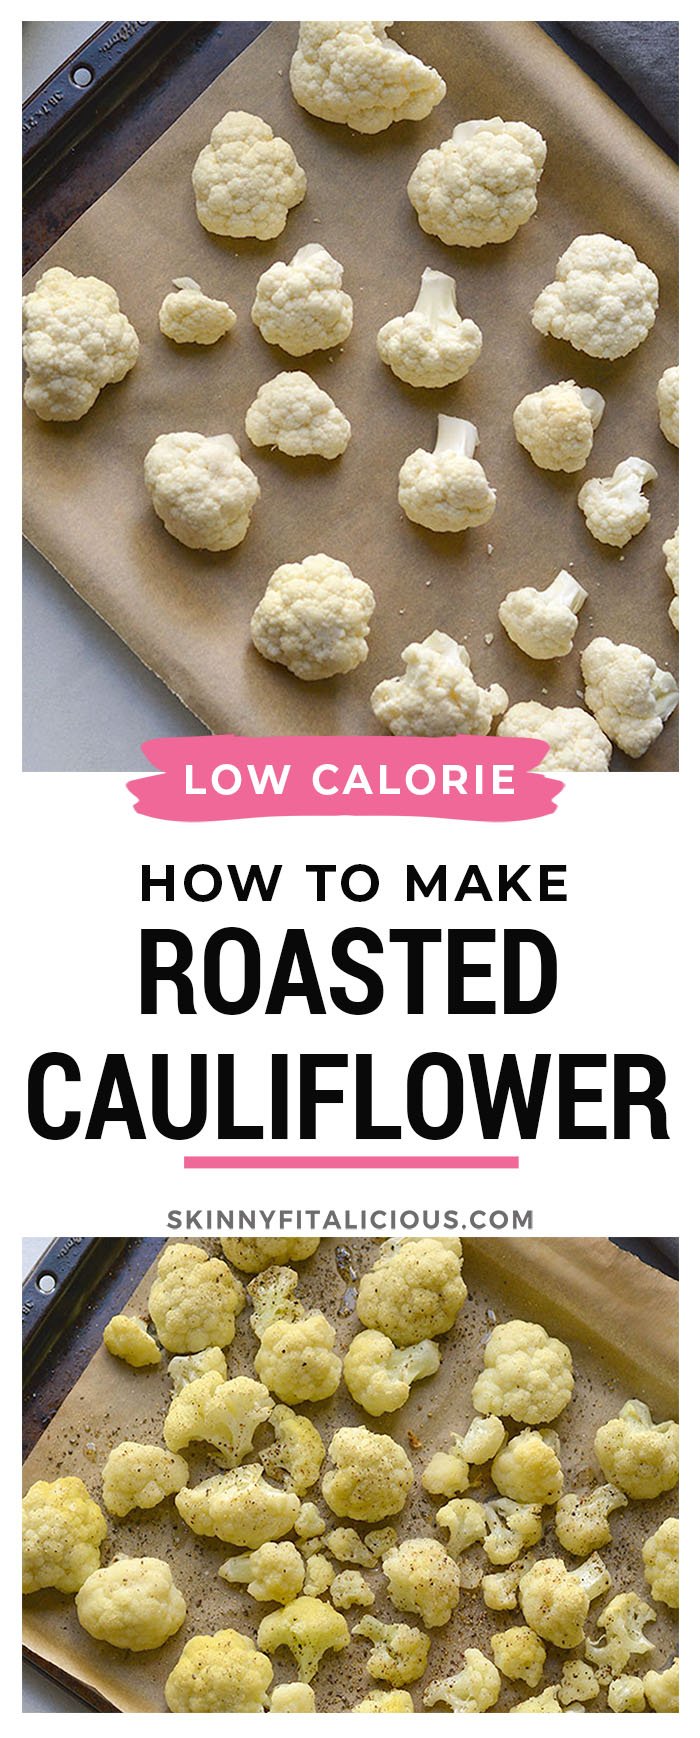 Roasted cauliflower is a healthy side dish that pairs well with any meal. Learn how to roast cauliflower so it tastes delicious every time!